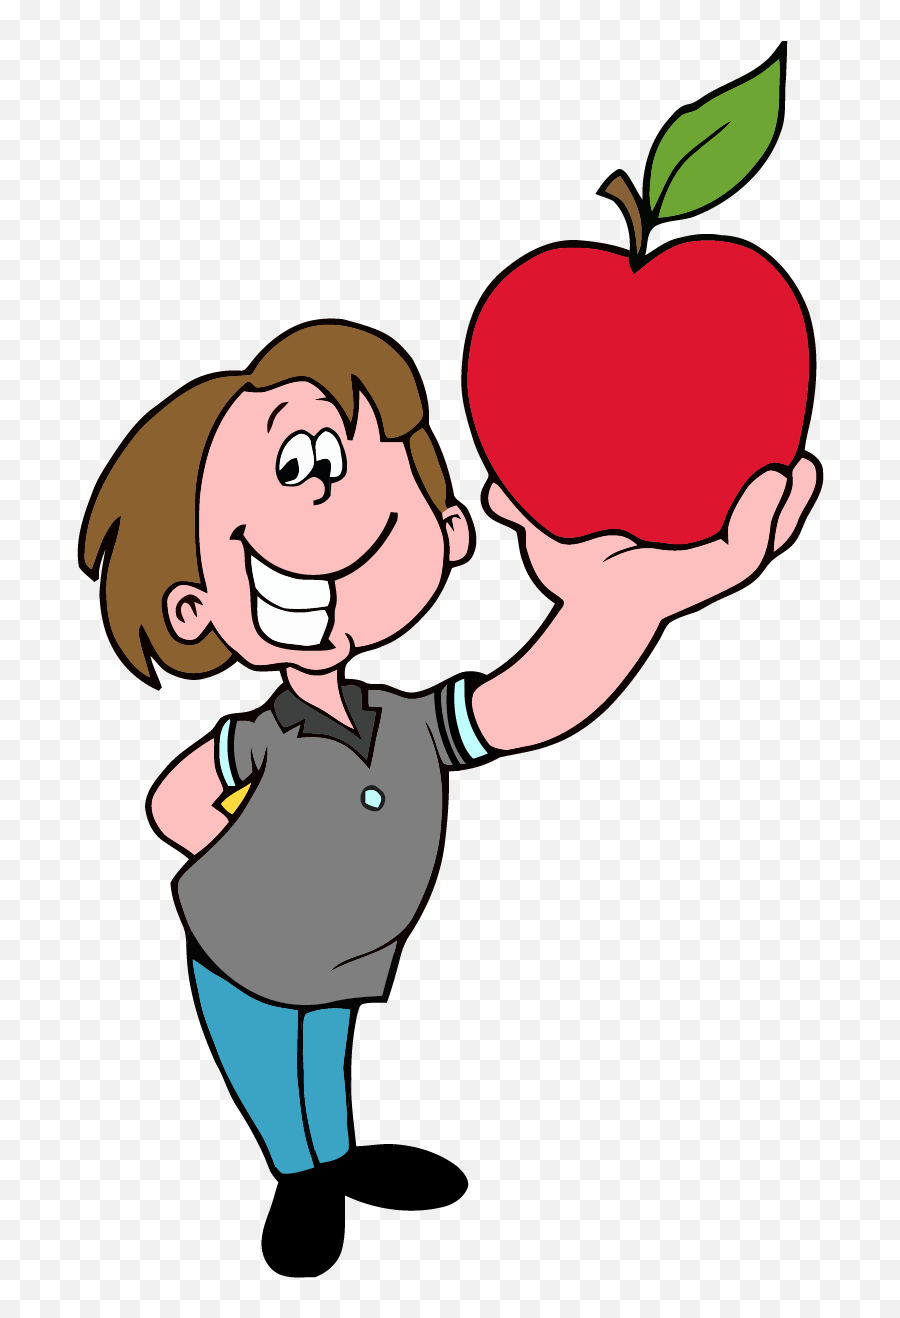 School Boy Apple Png Clipart - Holding An Apple Clip Art Example Of A Rhyming Poem,Apple Clipart Transparent